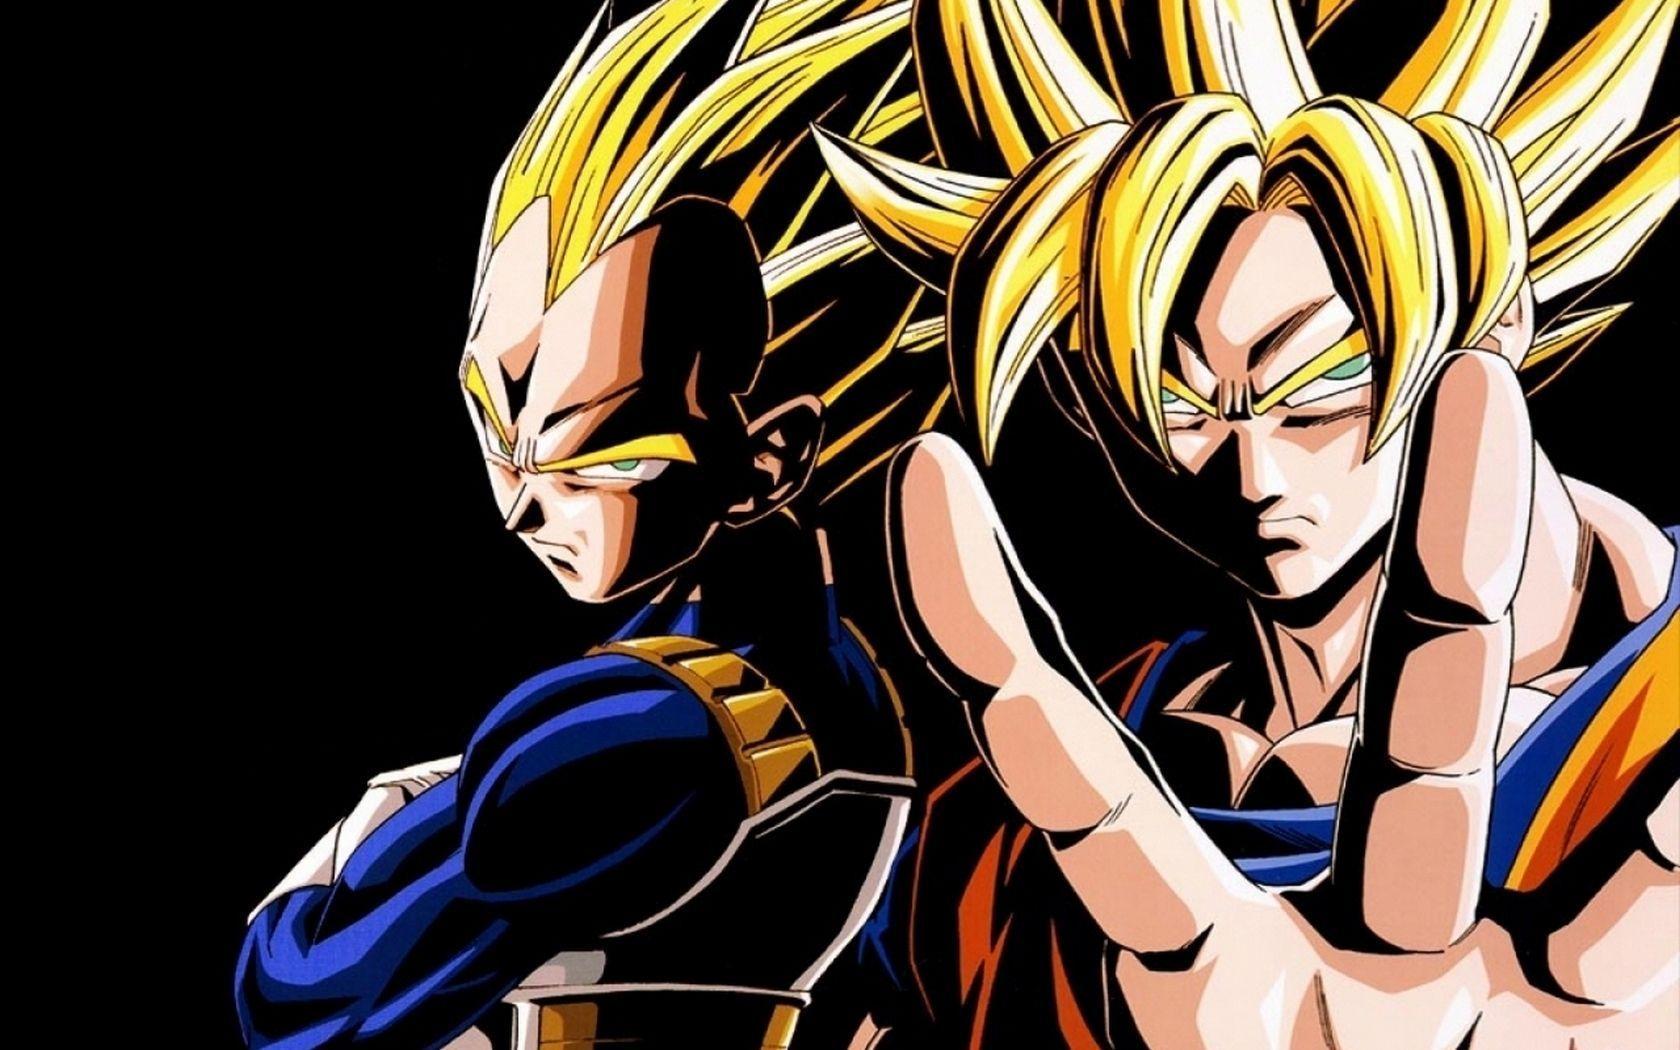 image For > Cool Dbz Wallpaper HD